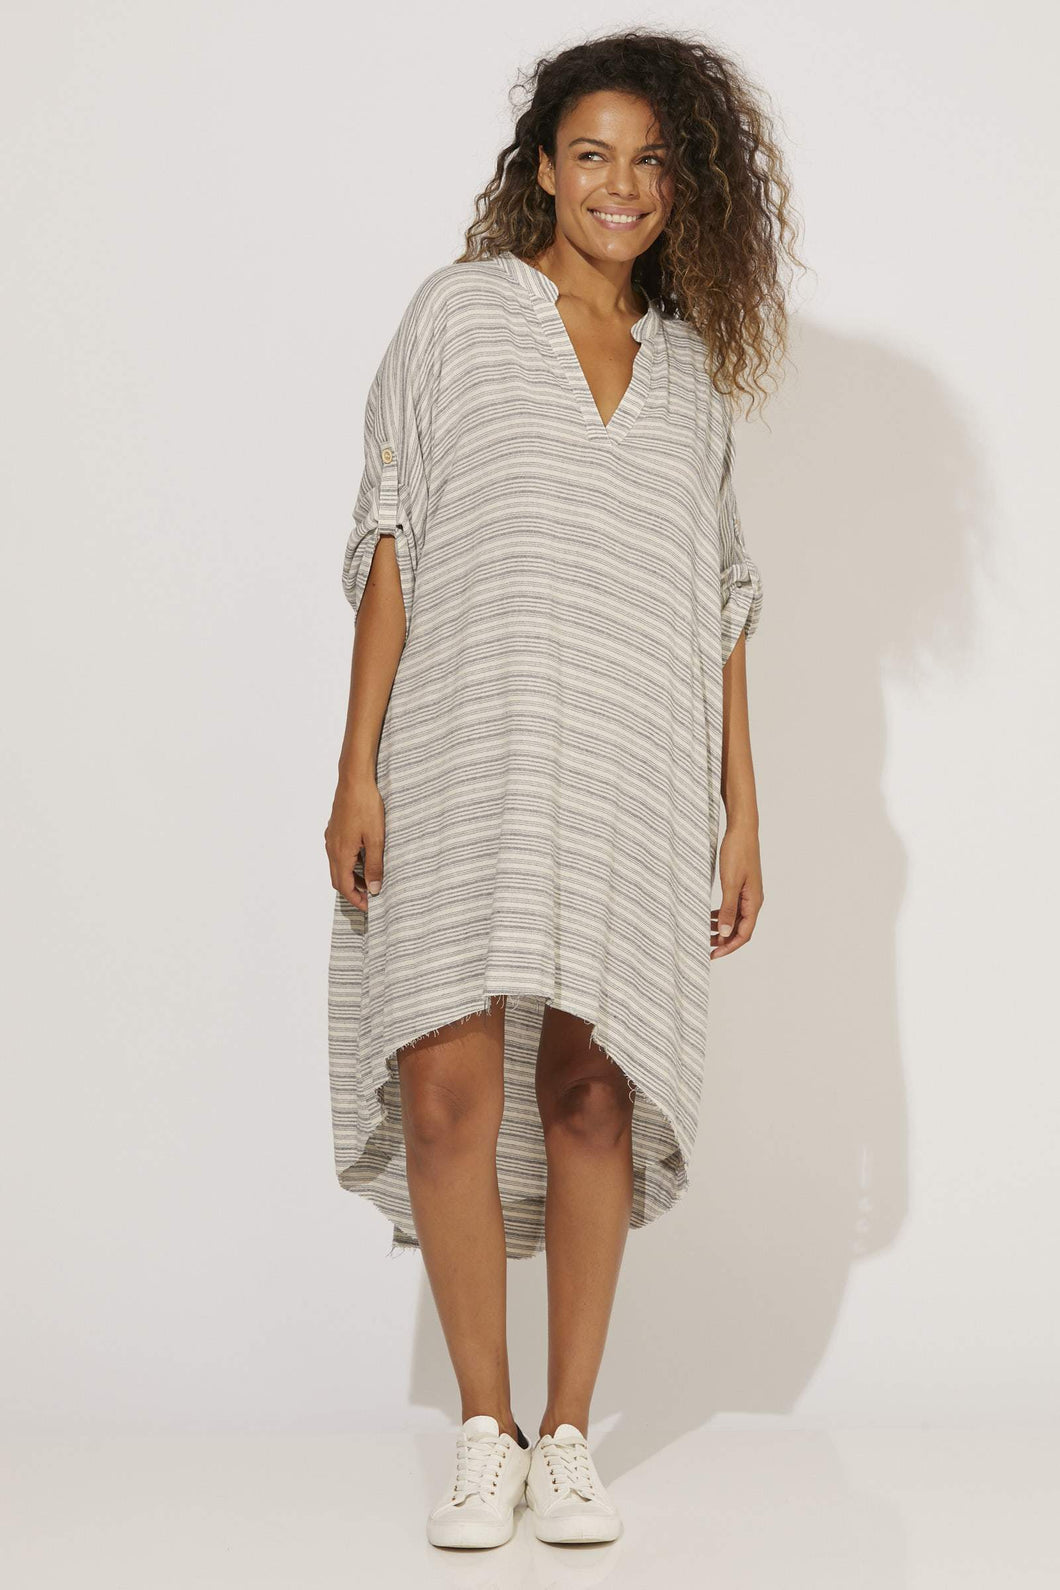 Shop Haven Clothing online Buy Haven Clothing Afterpay Store Australian Haven Stockists Shop Haven coverall Buy Haven Shirt Dress Mint Australian Haven Stockists Shop Haven Shirt Dress Bahama - Basic State